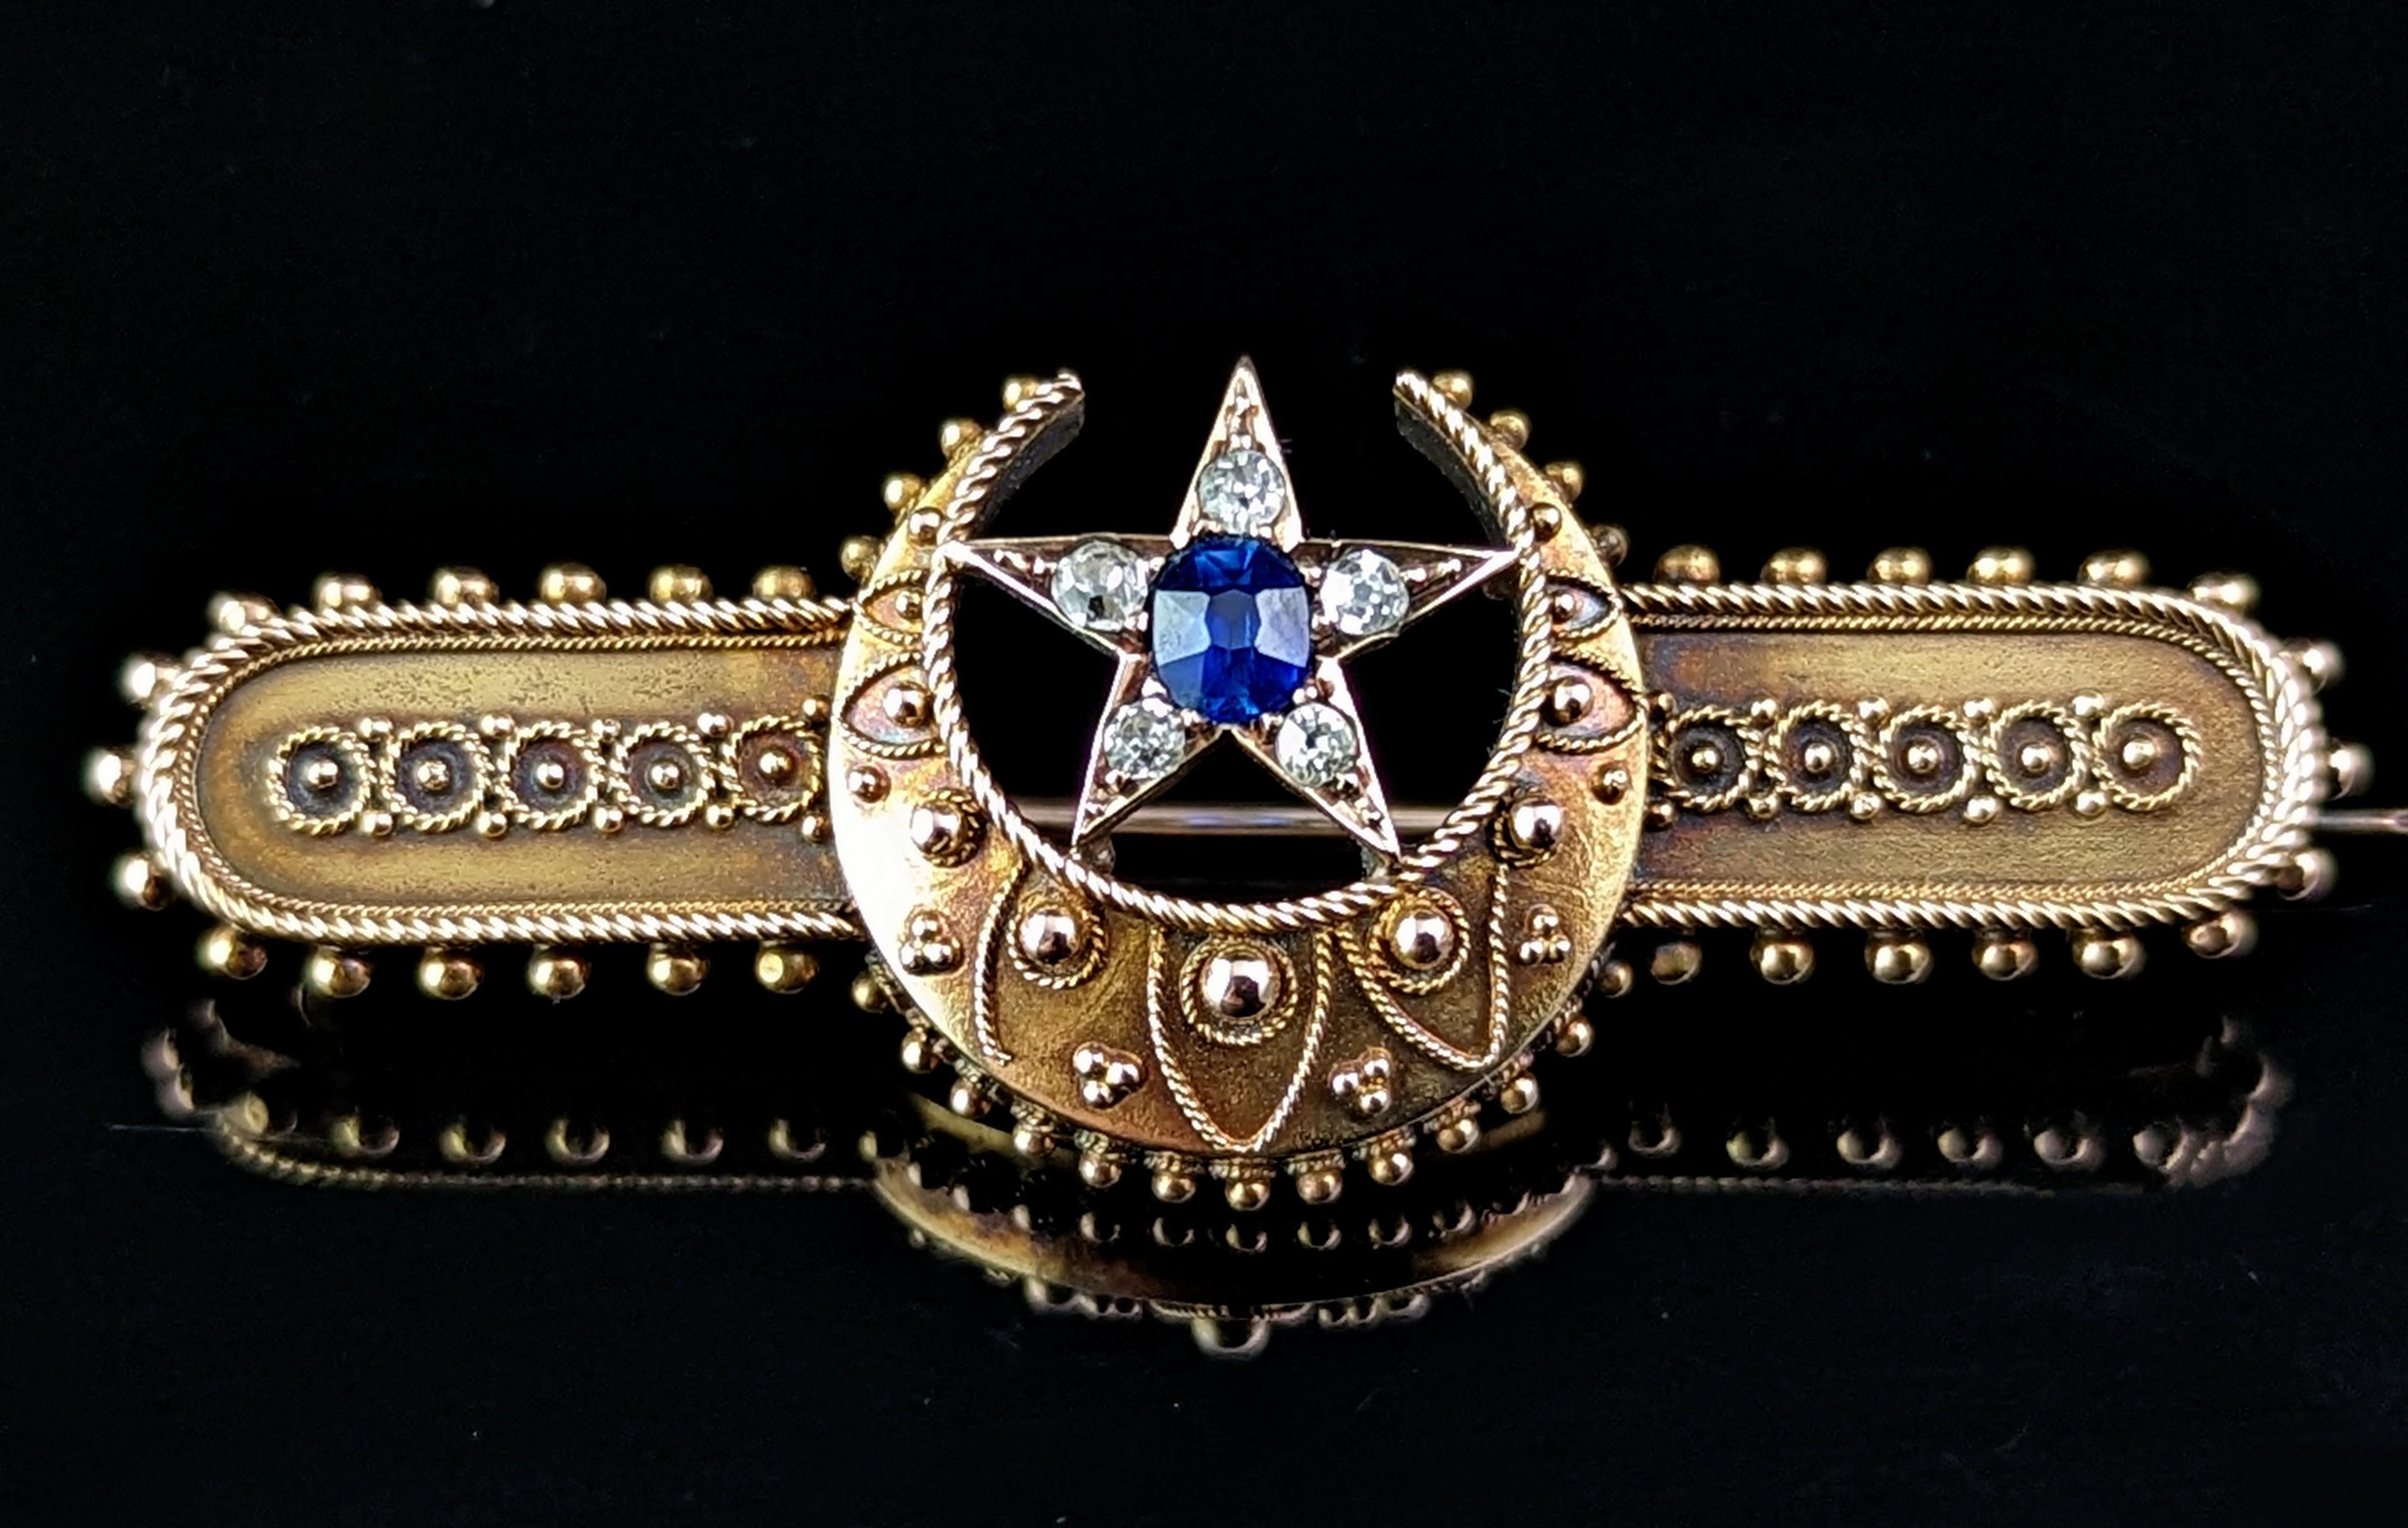 This magnificent antique Victorian era crescent moon and Star brooch is really something special.

Finely crafted in the Etruscan revival manner in rich 15ct gold with cannetille detailing and beading around the border.

It features a crescent moon